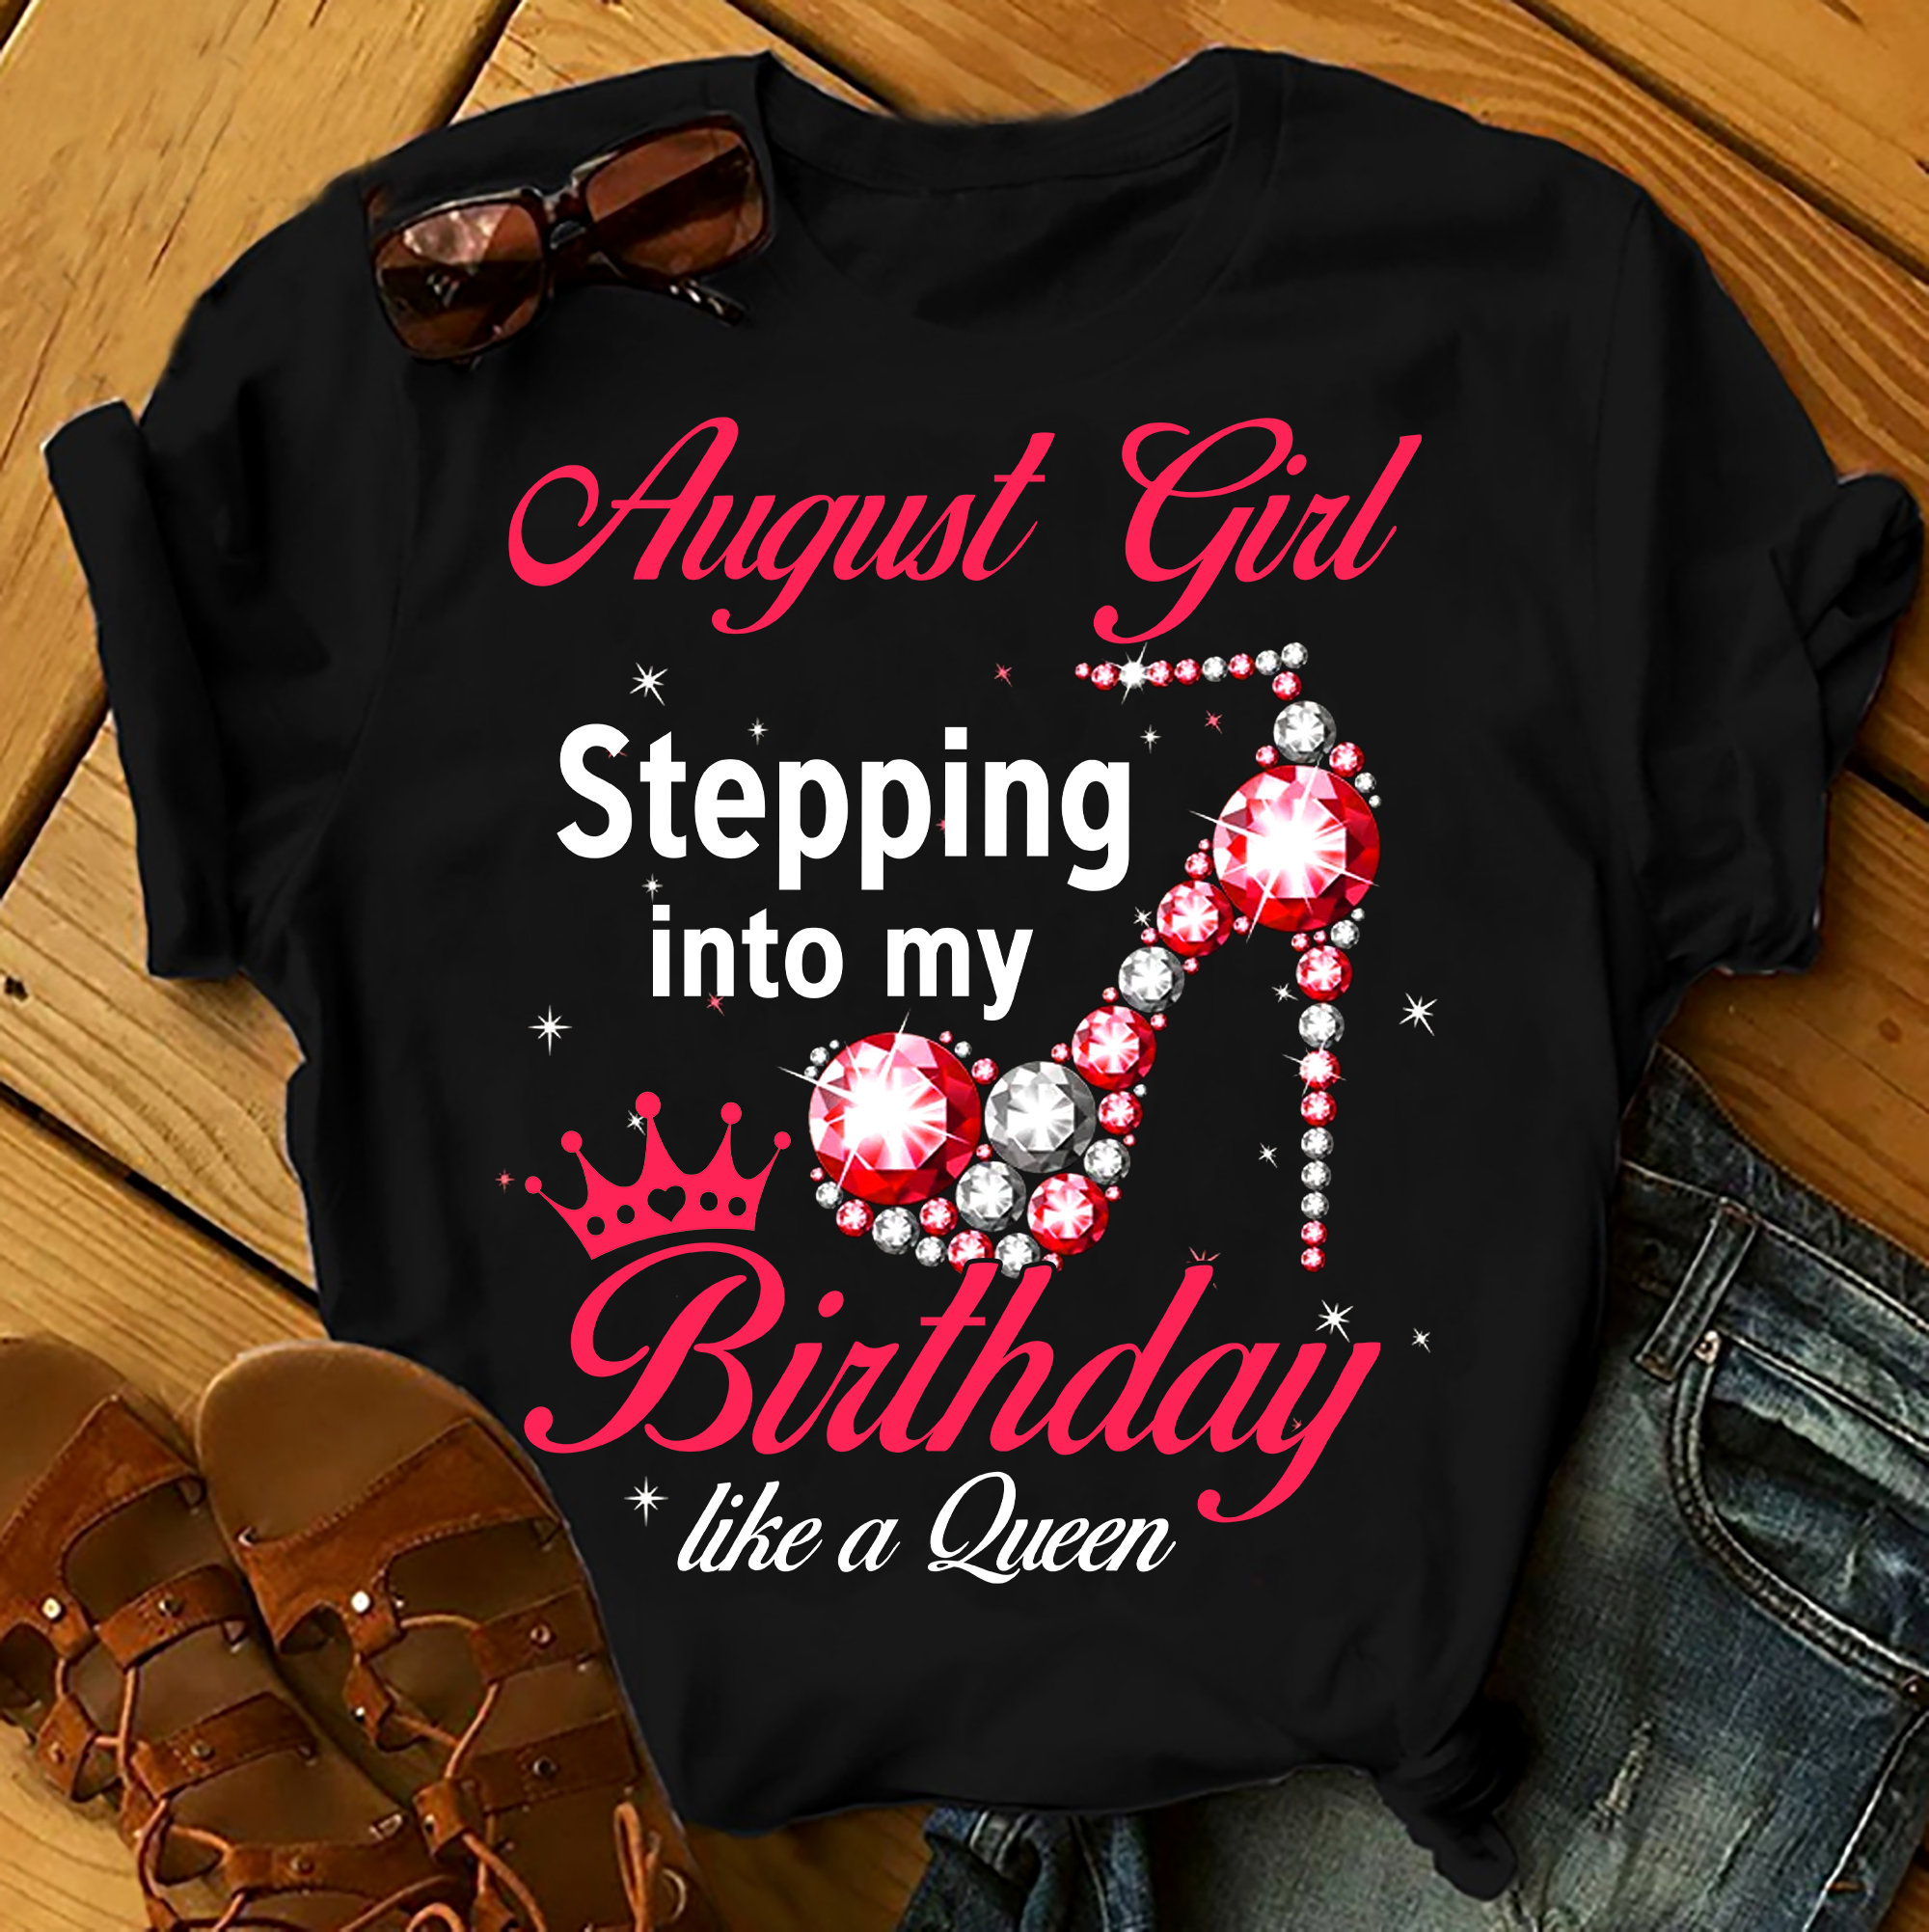 August Girl Stepping Into My Birthday Like A Queen Shirts Women, Birthday T Shirts, Summer Tops, Beach T Shirts